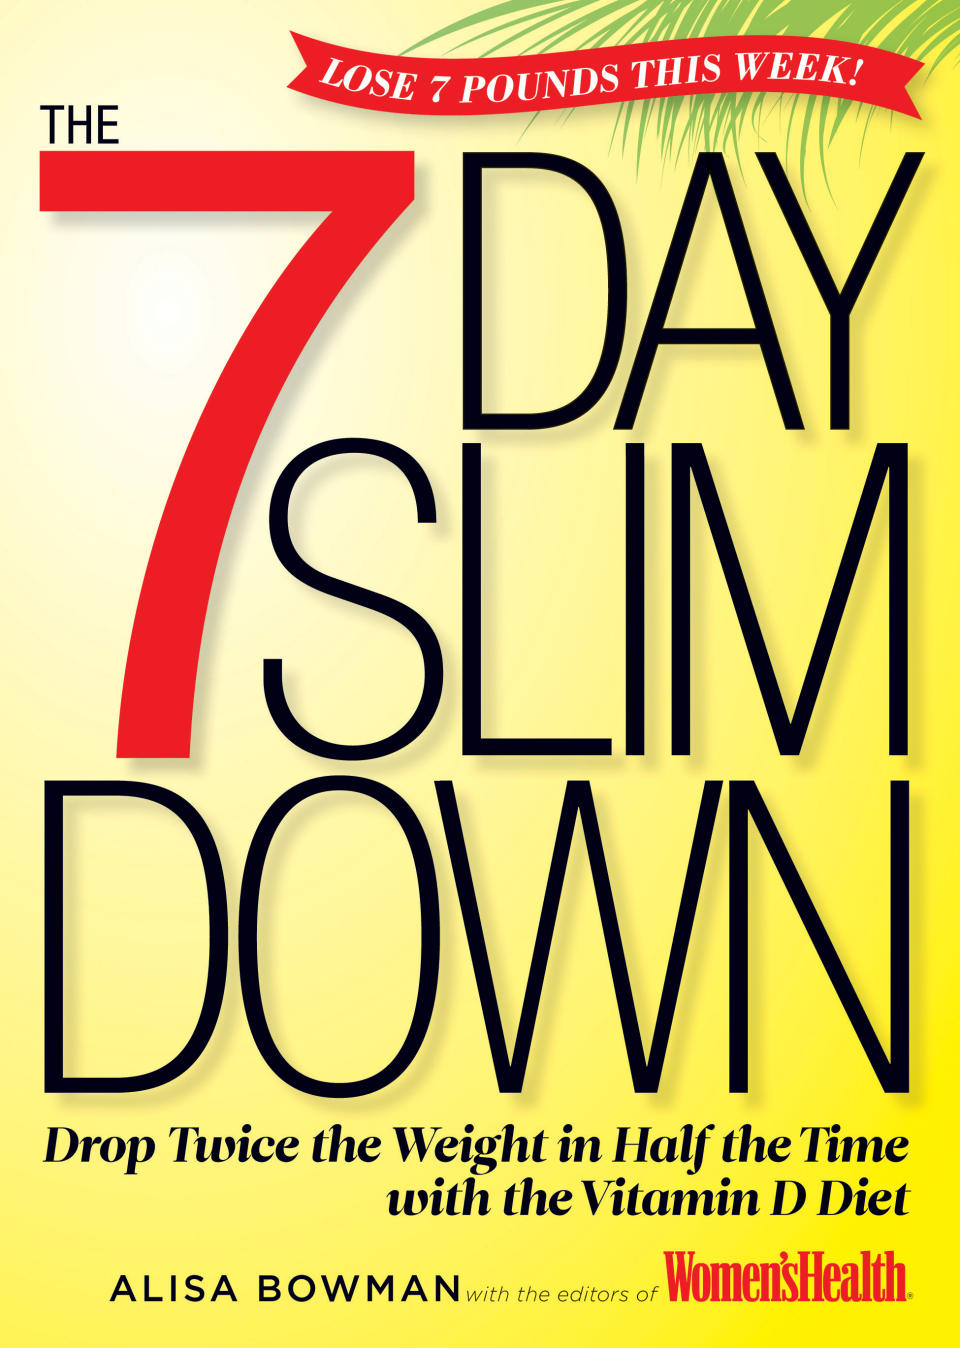 This undated publicity photo provided by Rodale Books shows the cover of the diet cookbook "The 7 Day Slim Down," by Alisa Bowman and the editors of Women's Health magazine. (AP Photo/Rodale Books)